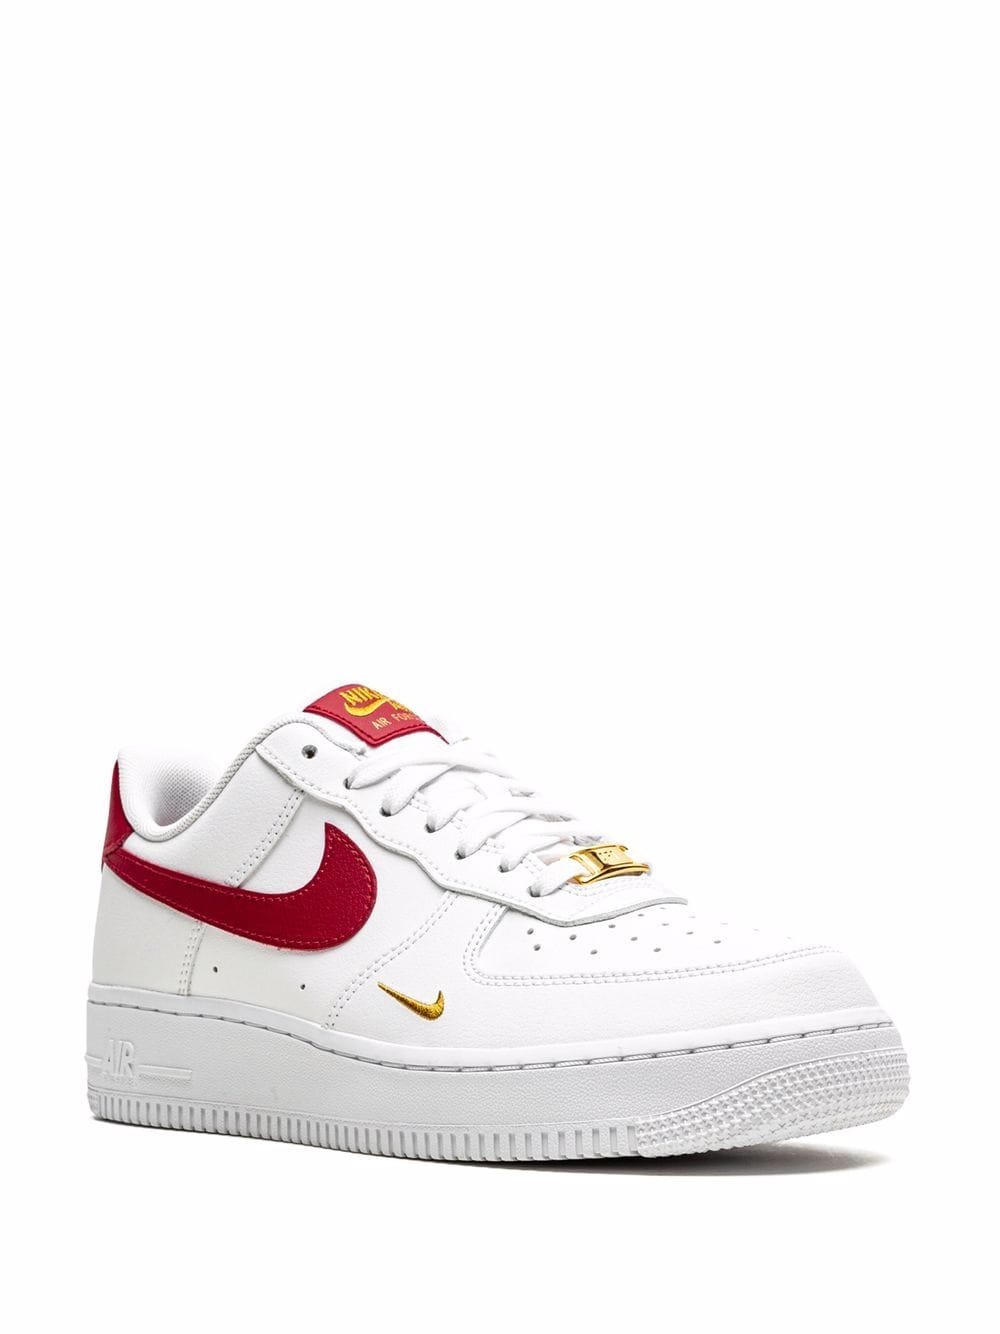 Image 2 of Nike Air Force 1 Low Essential "White/Gym Red" sneakers